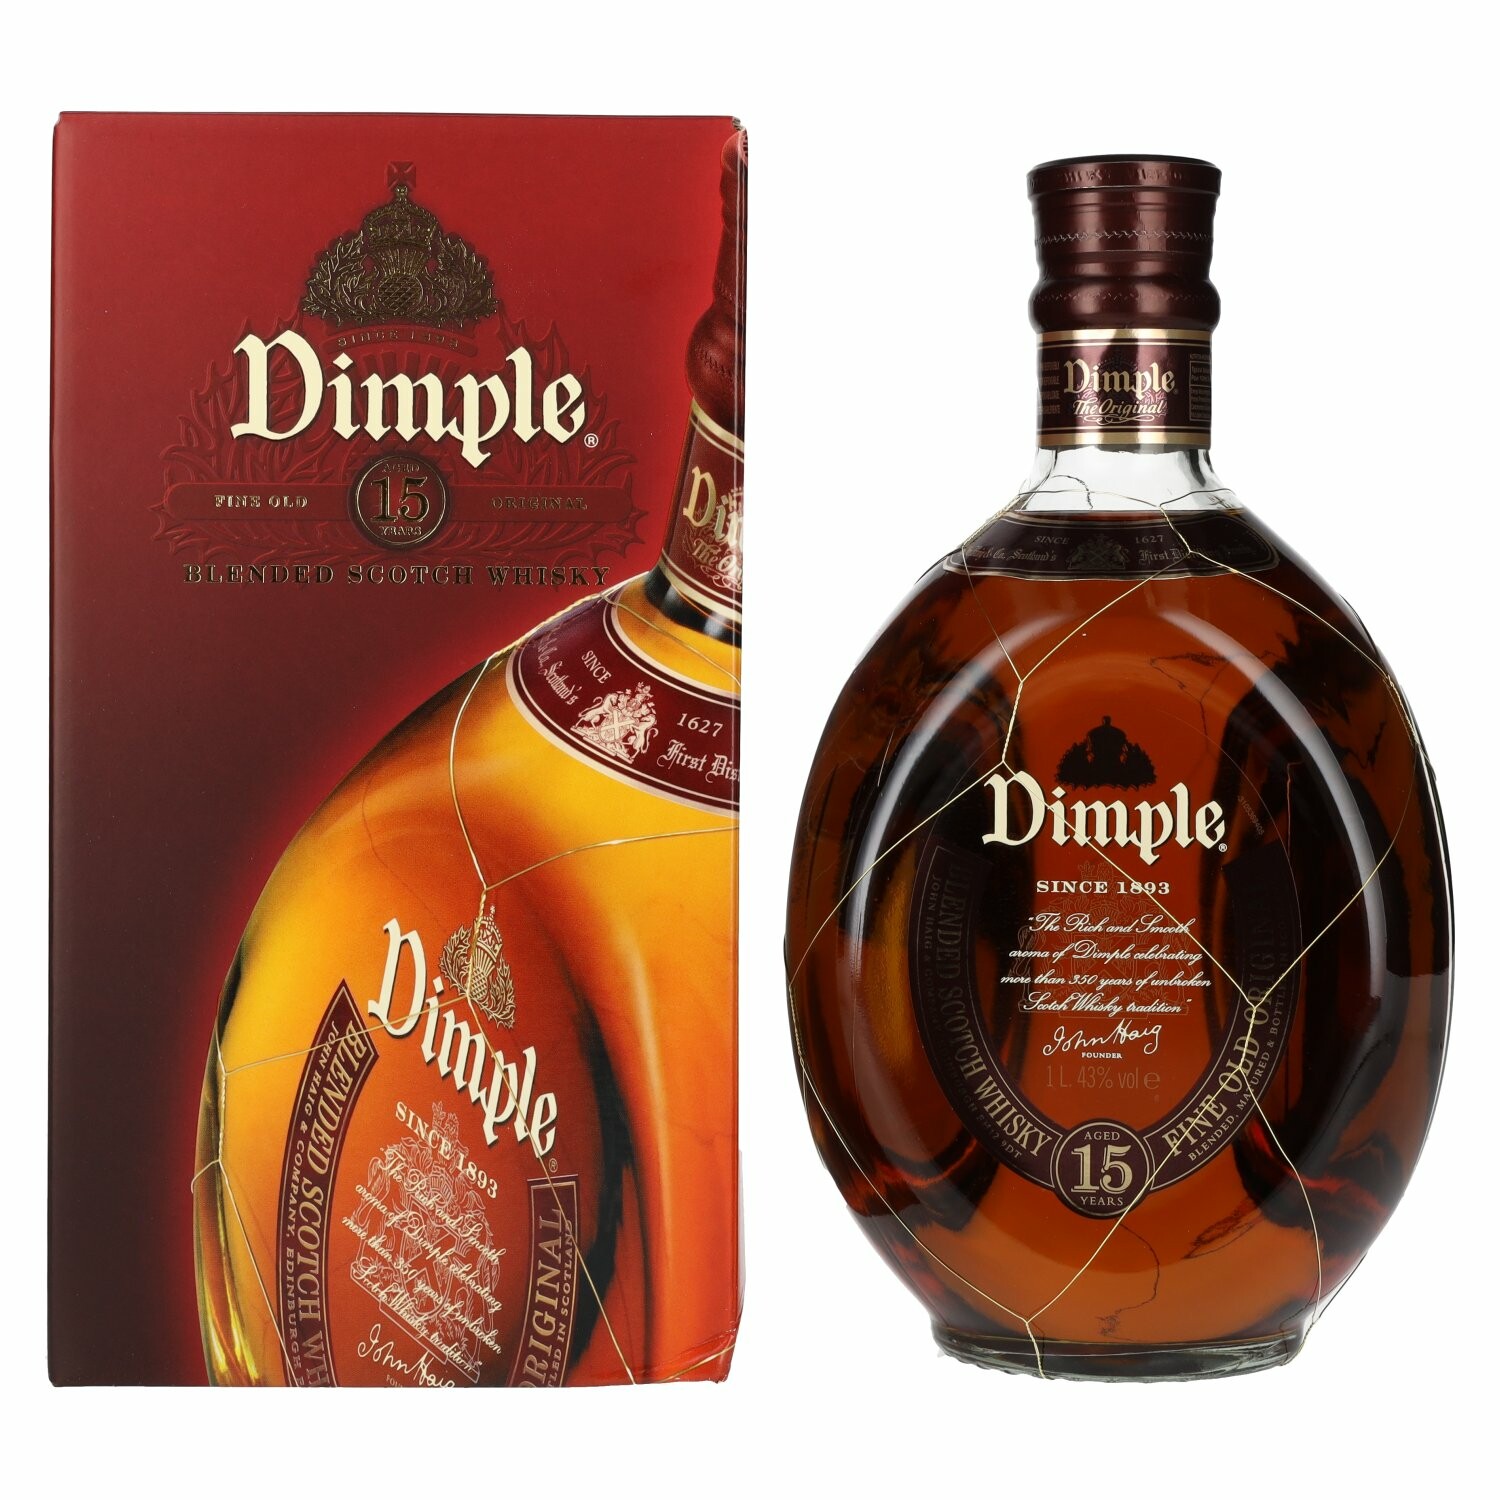 Dimple 15 Years Old Blended Scotch Whisky 43% Vol. 1l in Giftbox